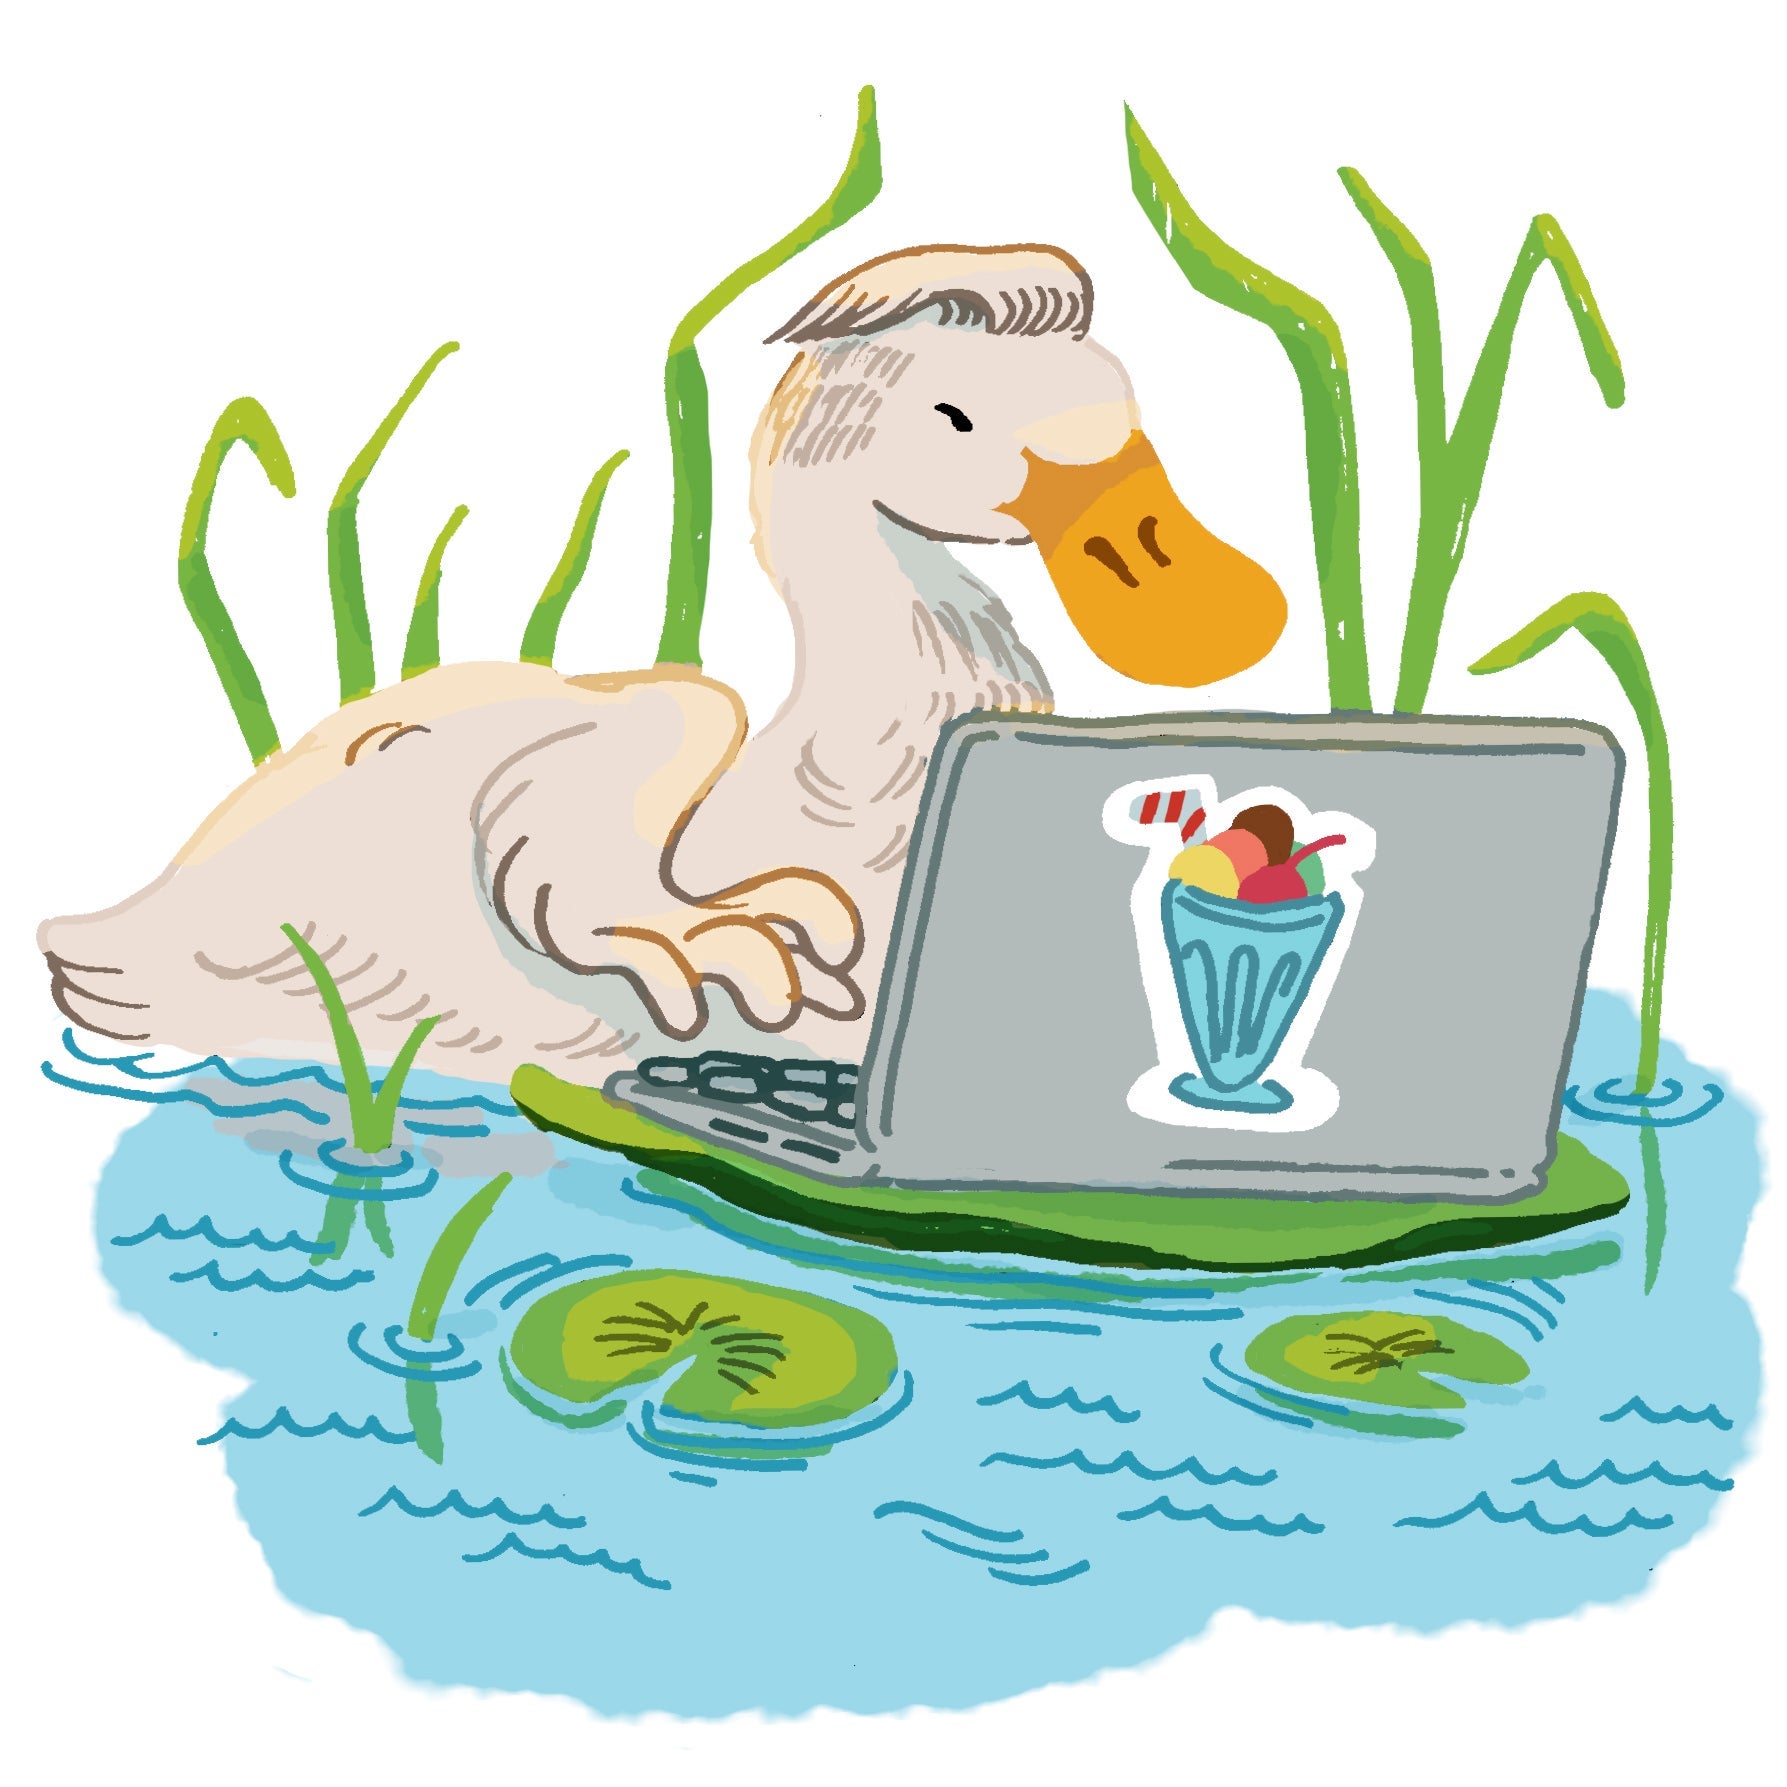 Illustration of a duck working on a laptop in a pond. There's a milkshake sticker on the laptop.